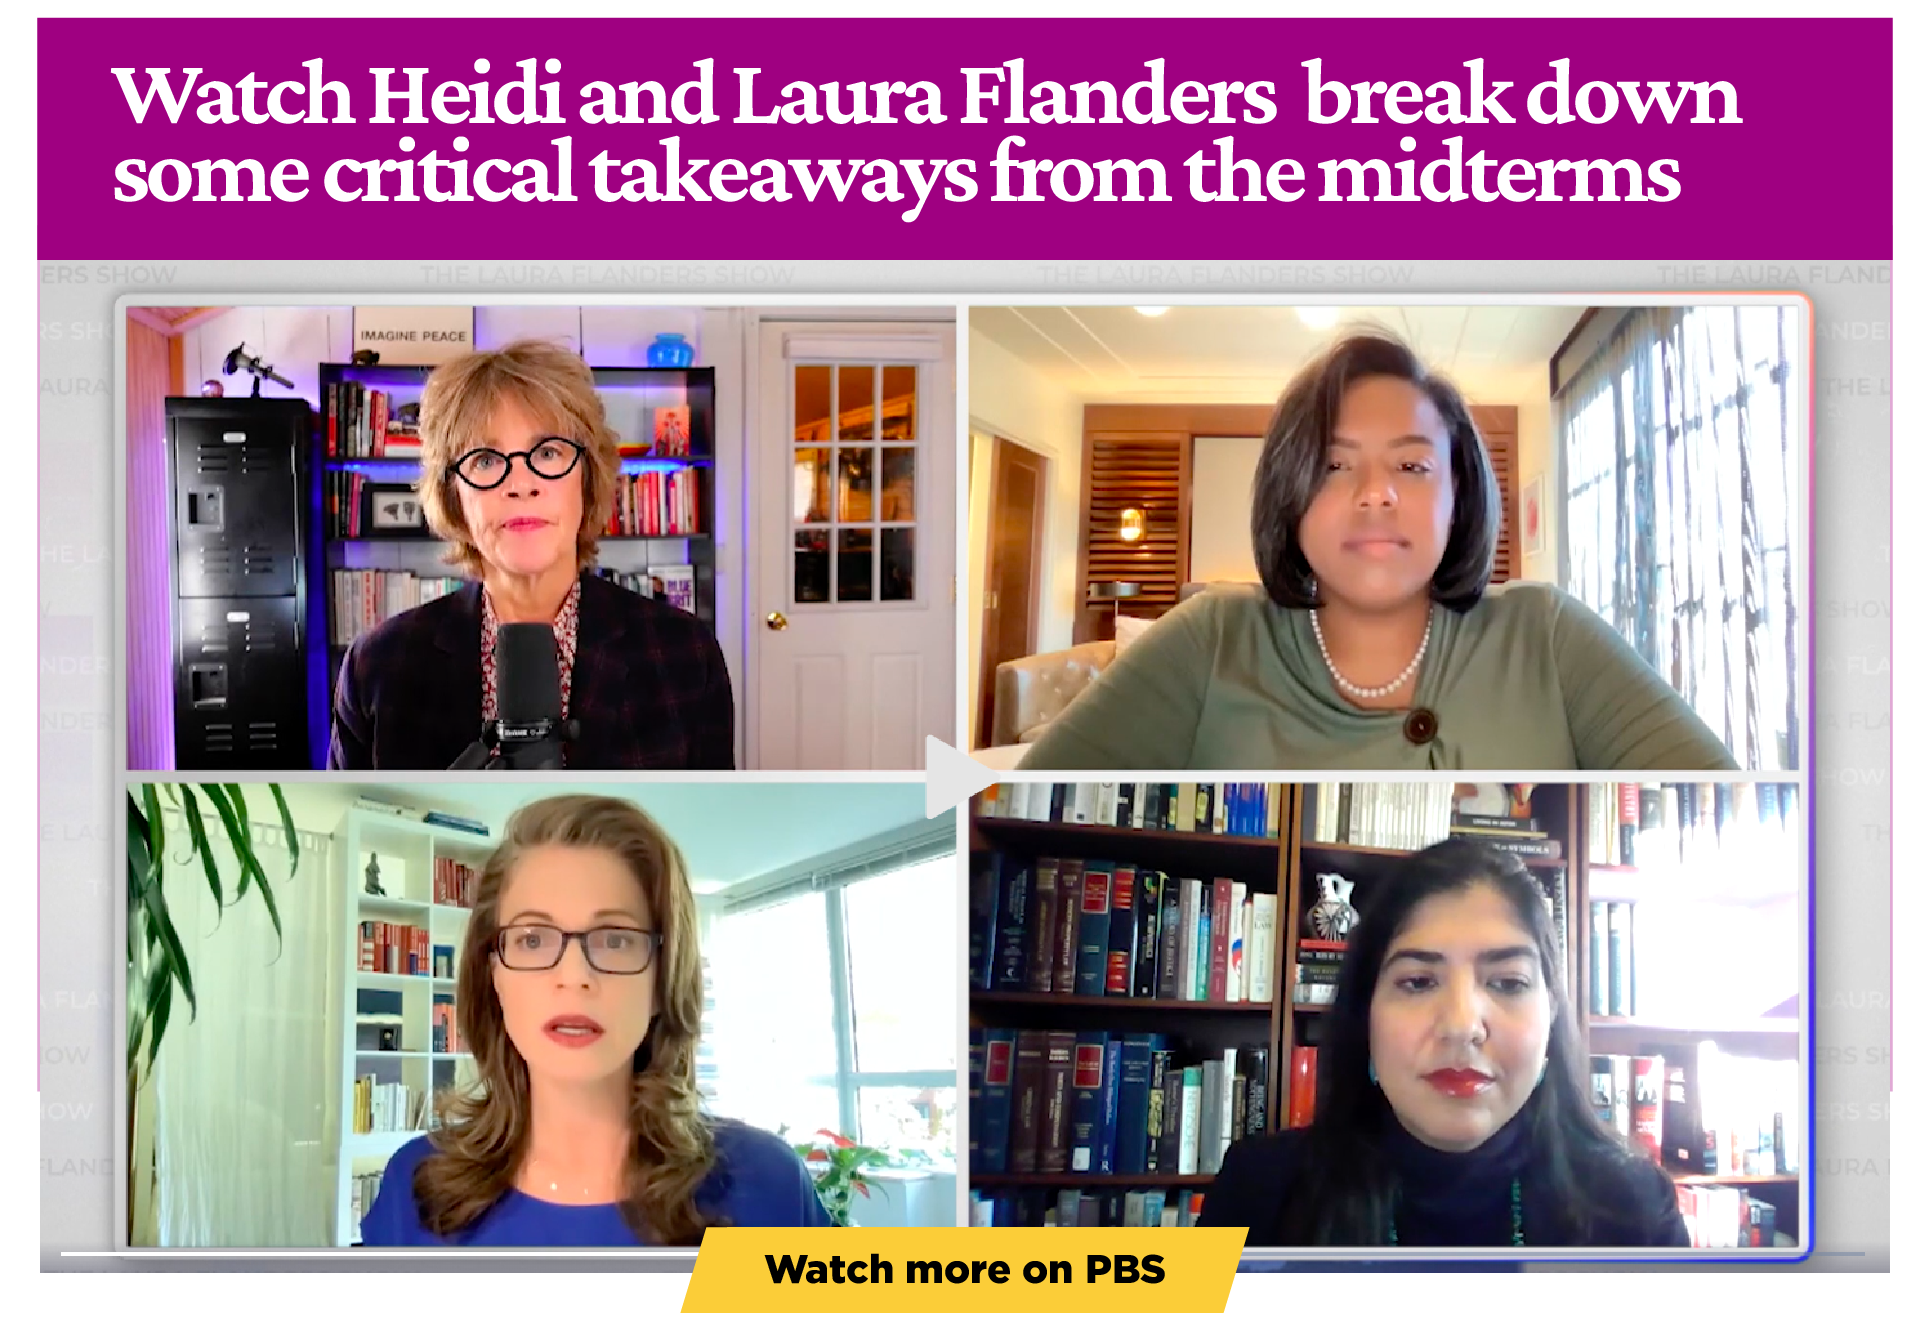 Watch Heidi and Laura Flanders break down some critical takeaways from the midterms